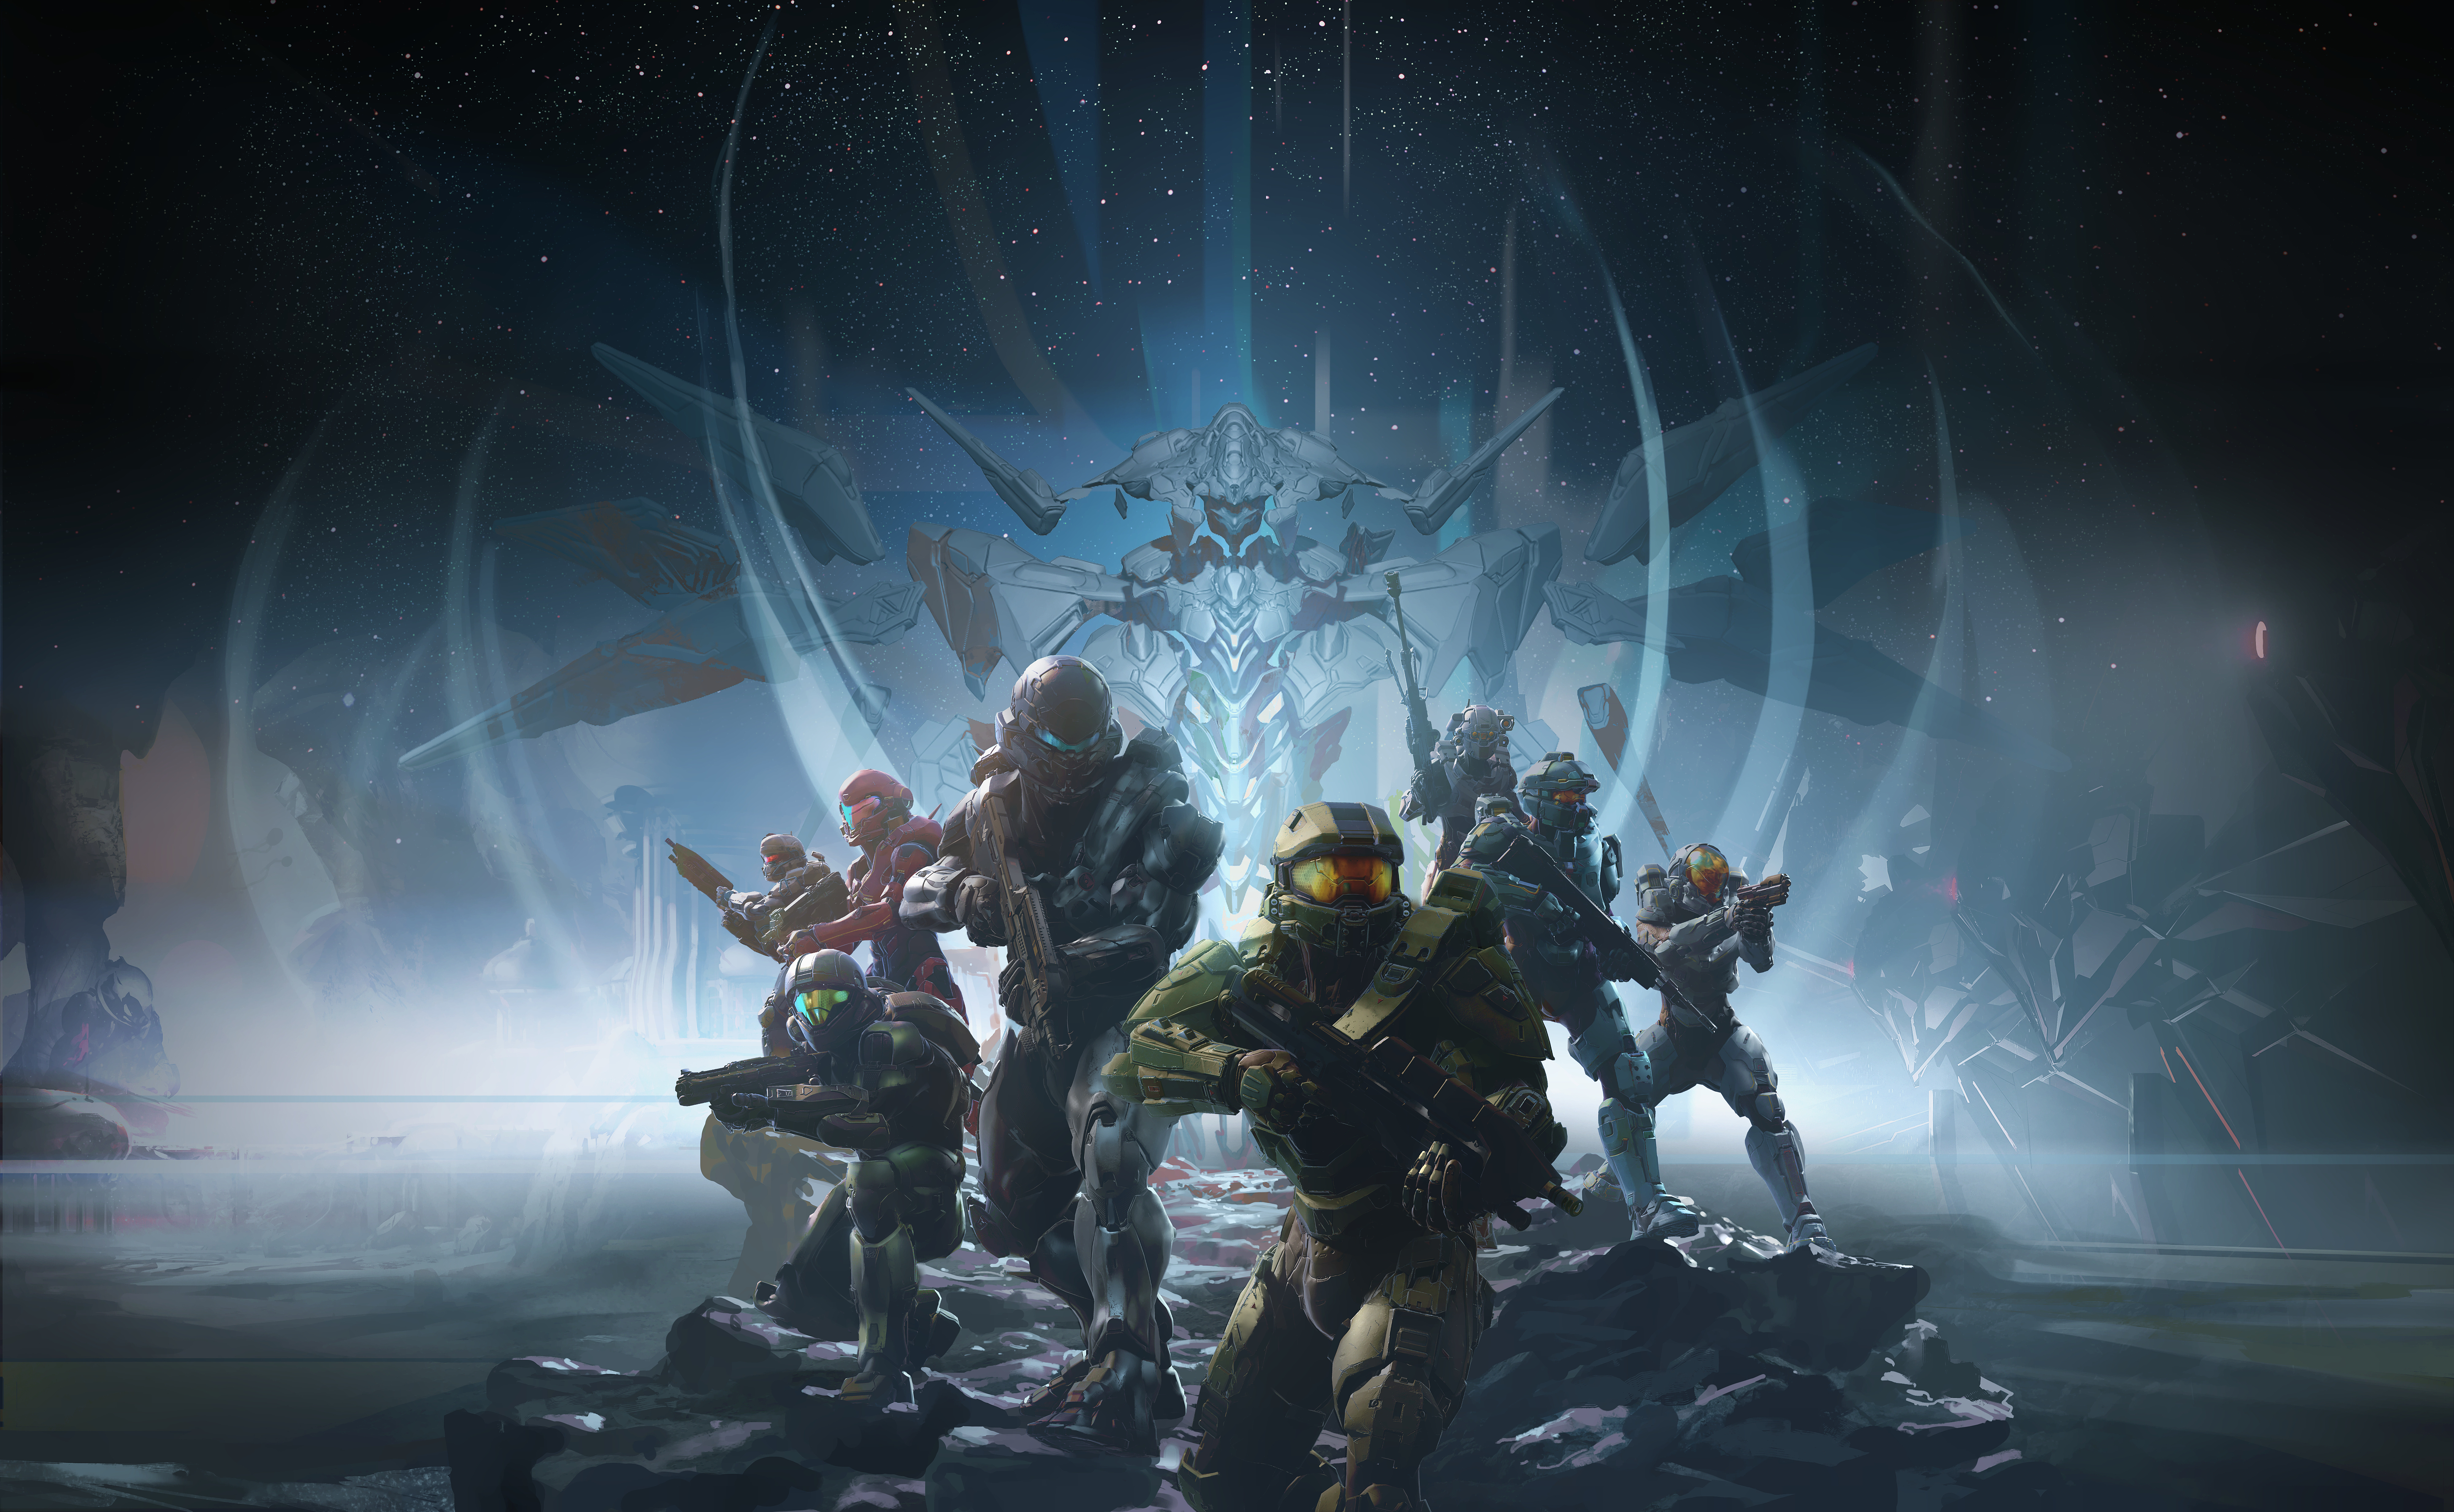 halo 5: guardians, video game, master chief, halo